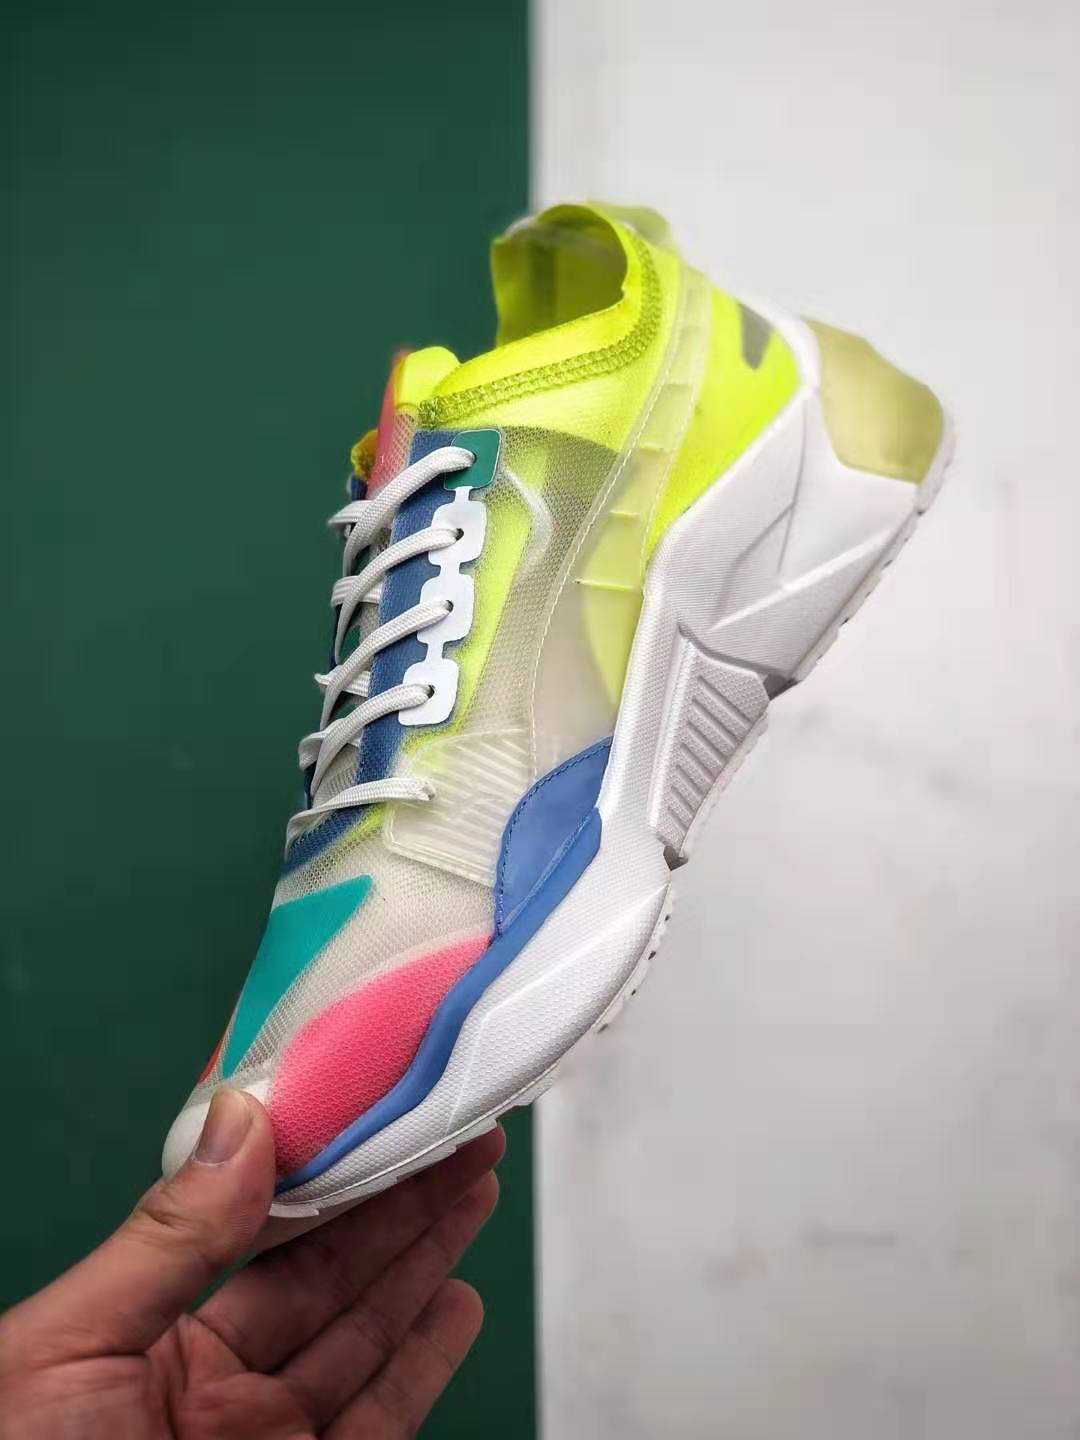 Puma LQDCELL Optic Sheer Multicolor 192560-01: Stylish and Versatile Athletic Sneakers